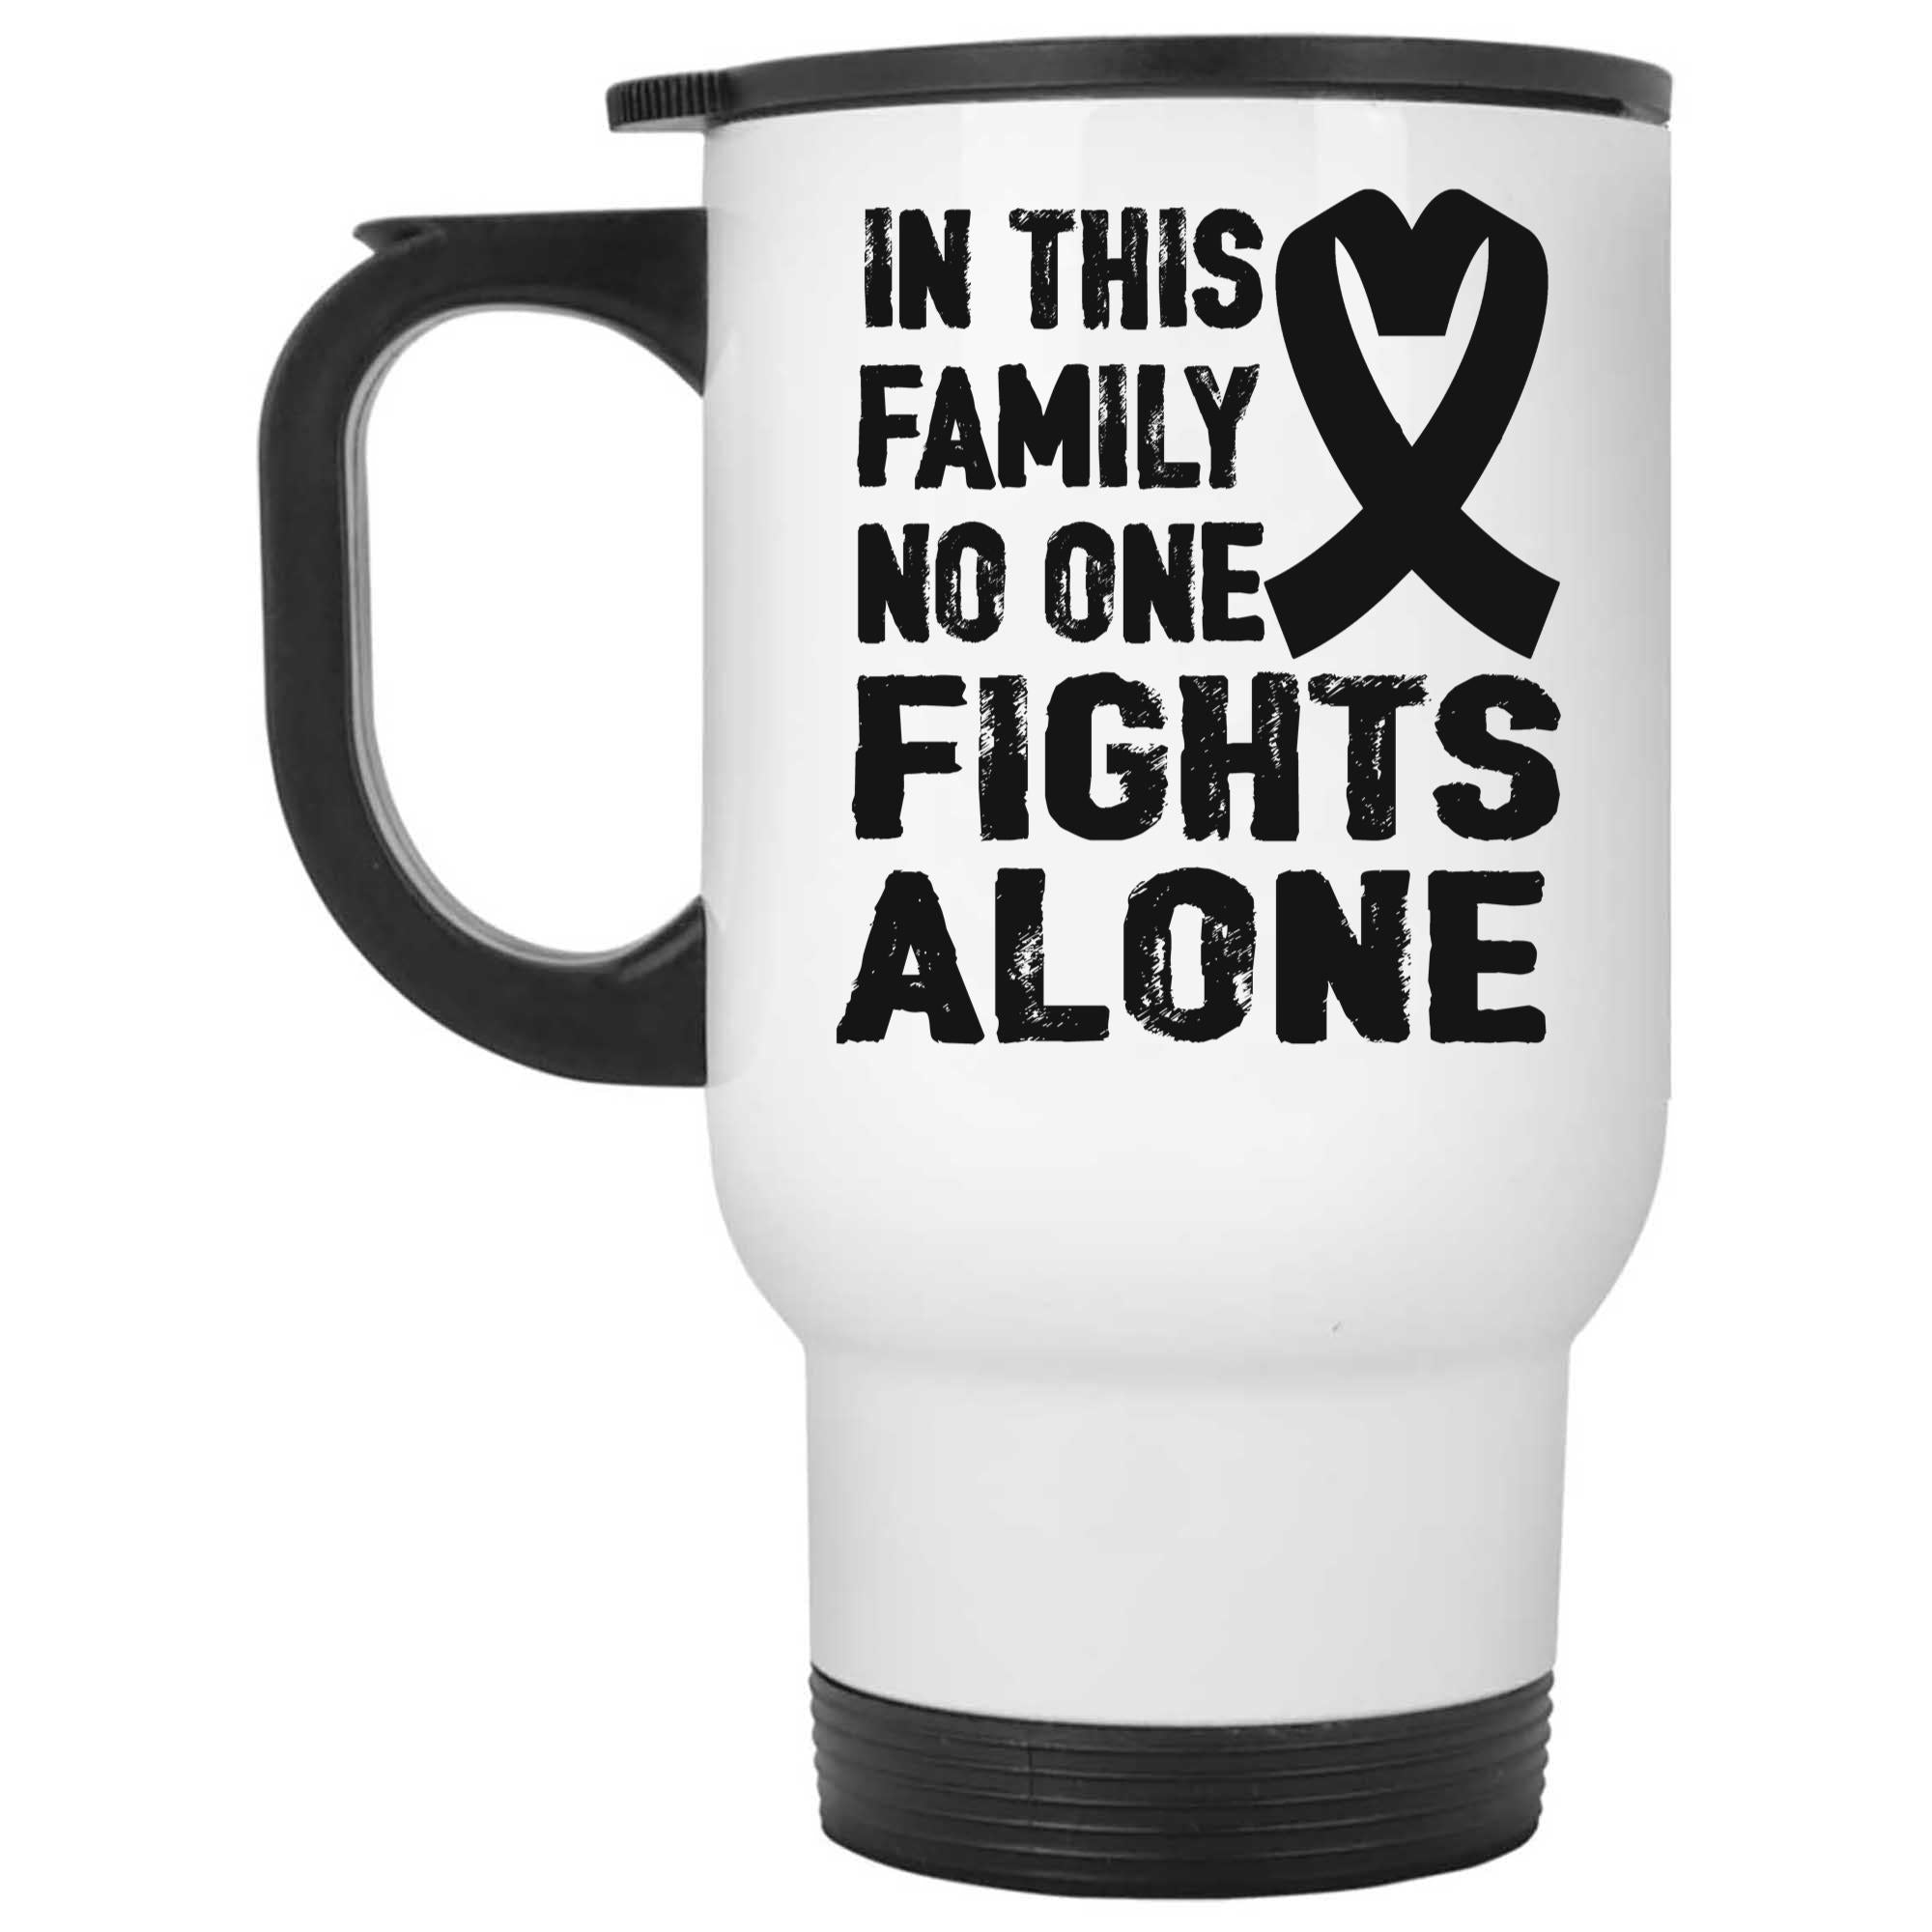 Skitongifts Funny Ceramic Novelty Coffee Mug Breast Cancer In This Family No One Fights Alone fnCk46V